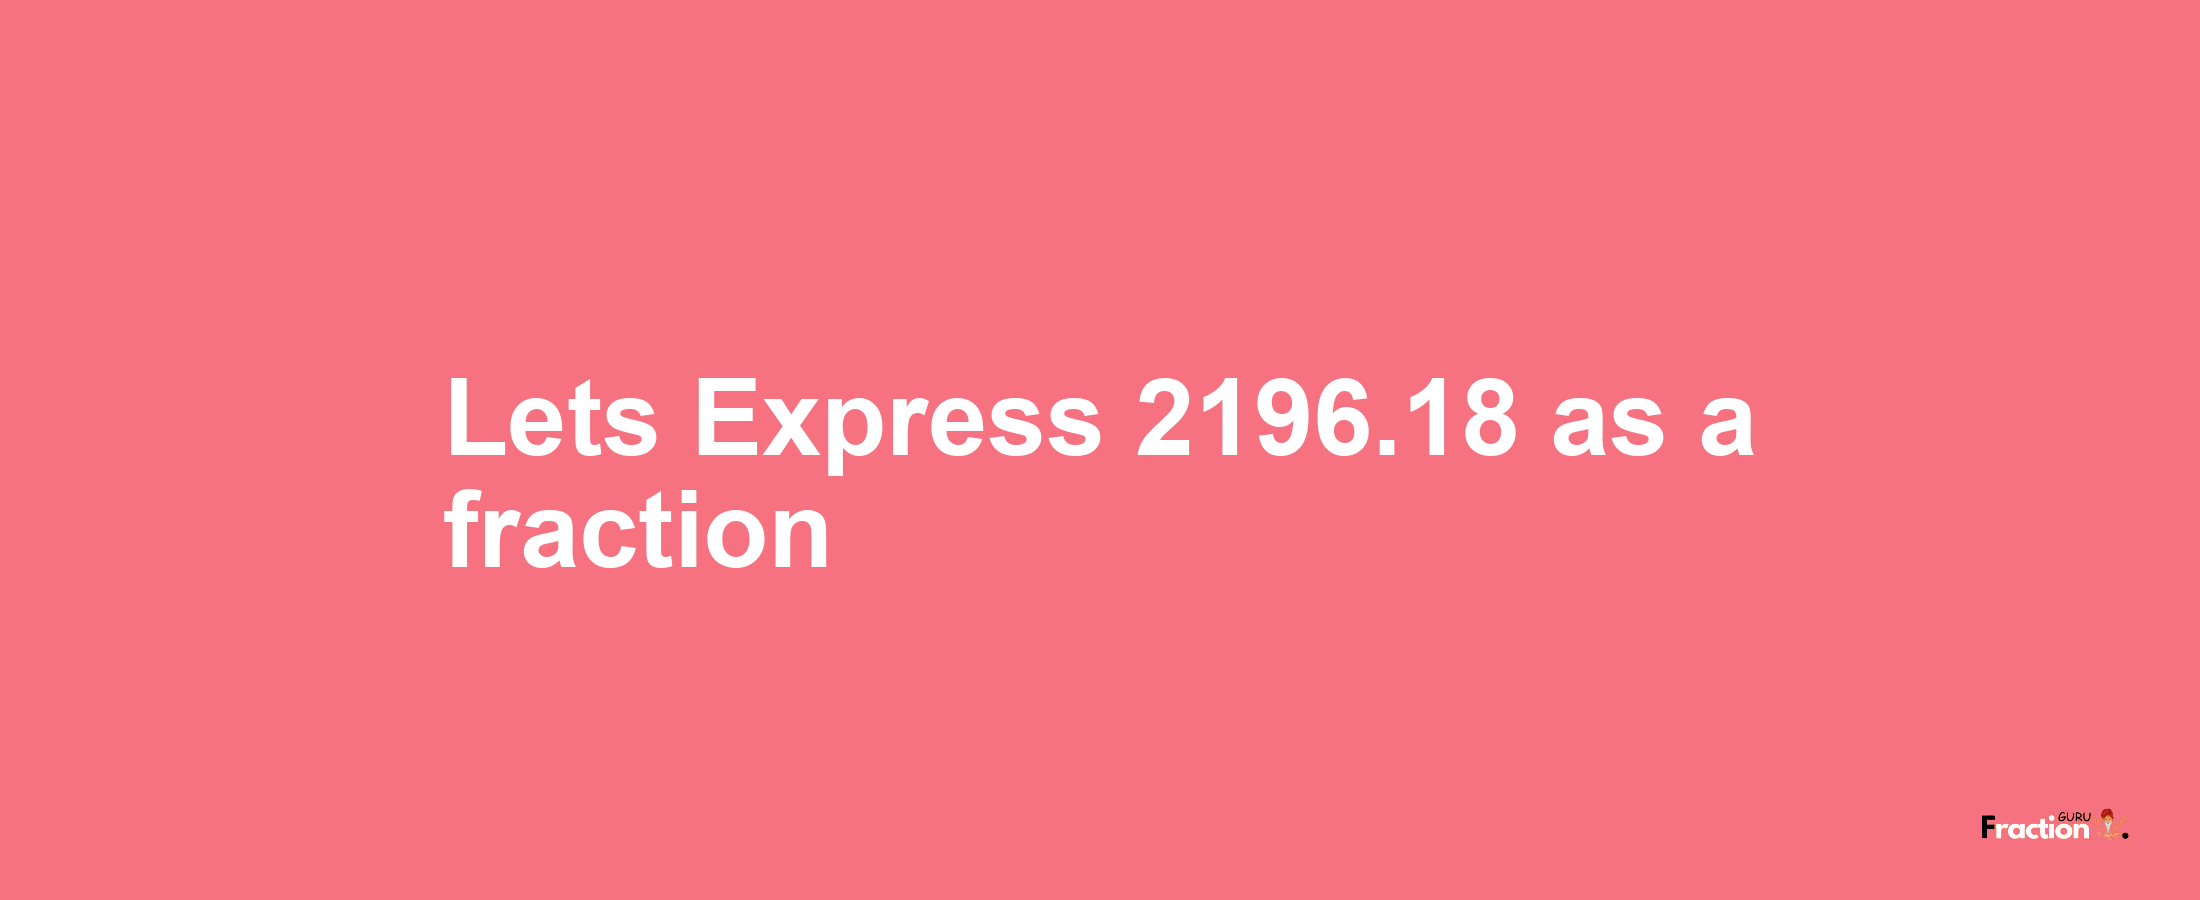 Lets Express 2196.18 as afraction